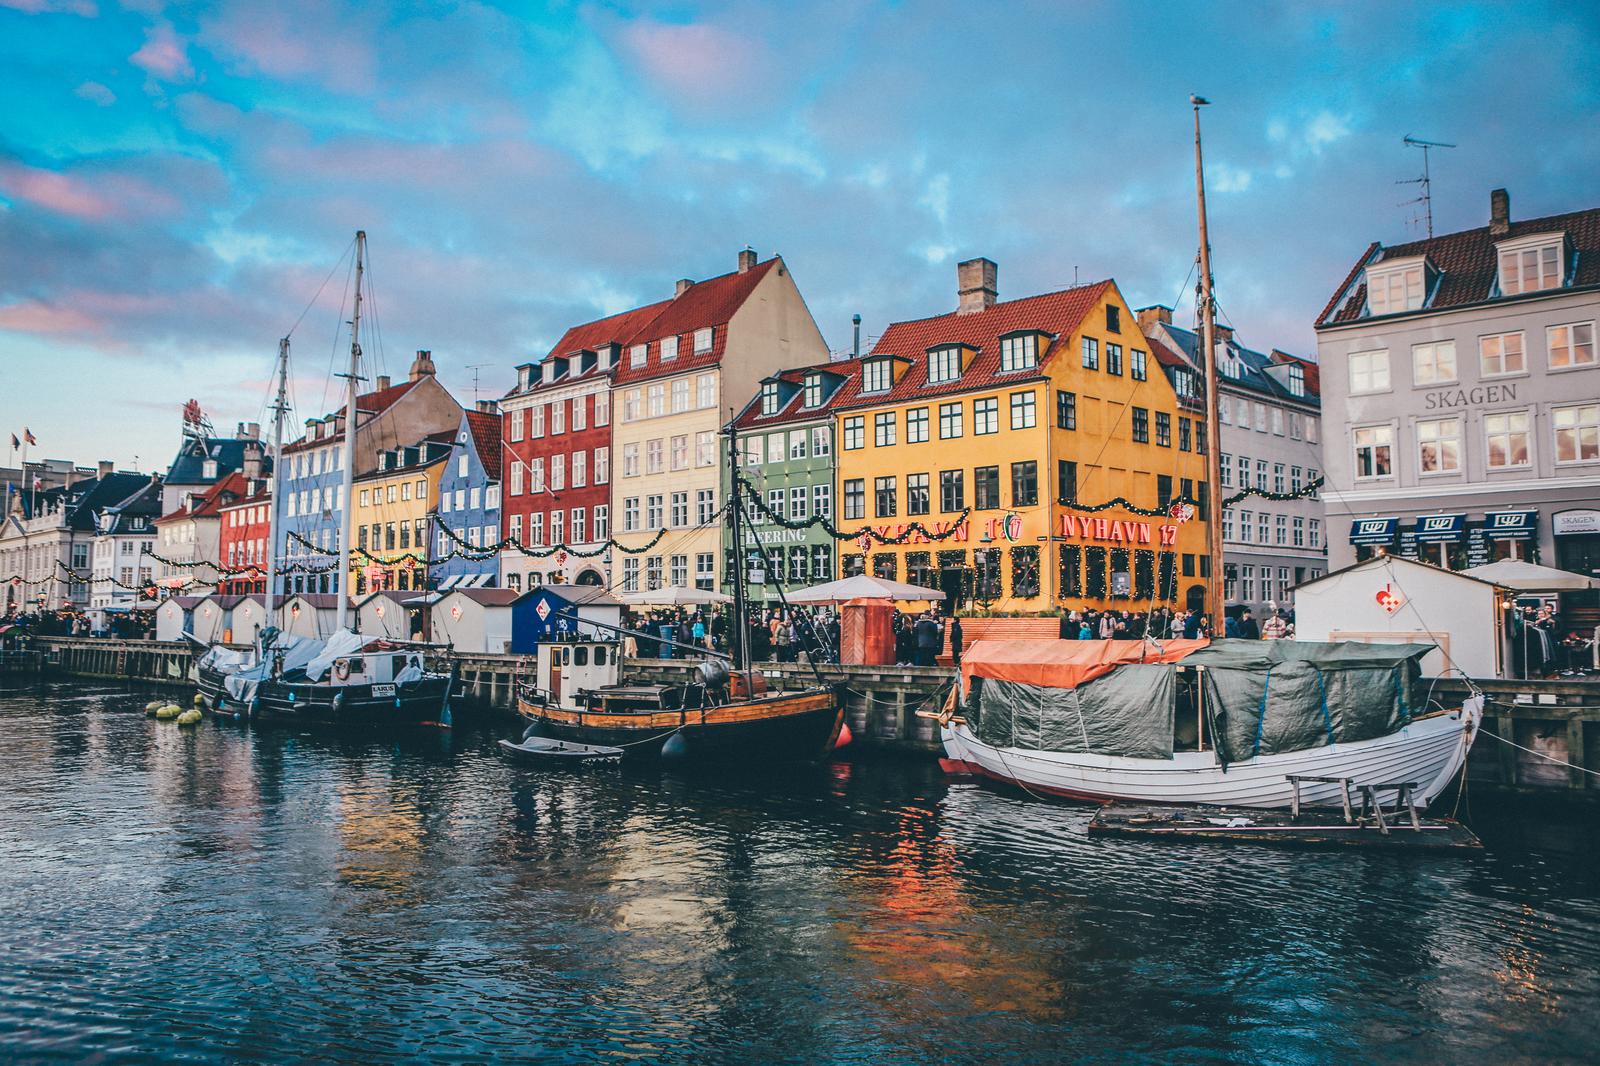 Are You a World Traveler? Test Your Knowledge by Matching These Majestic Natural Sites to Their Countries! Denmark